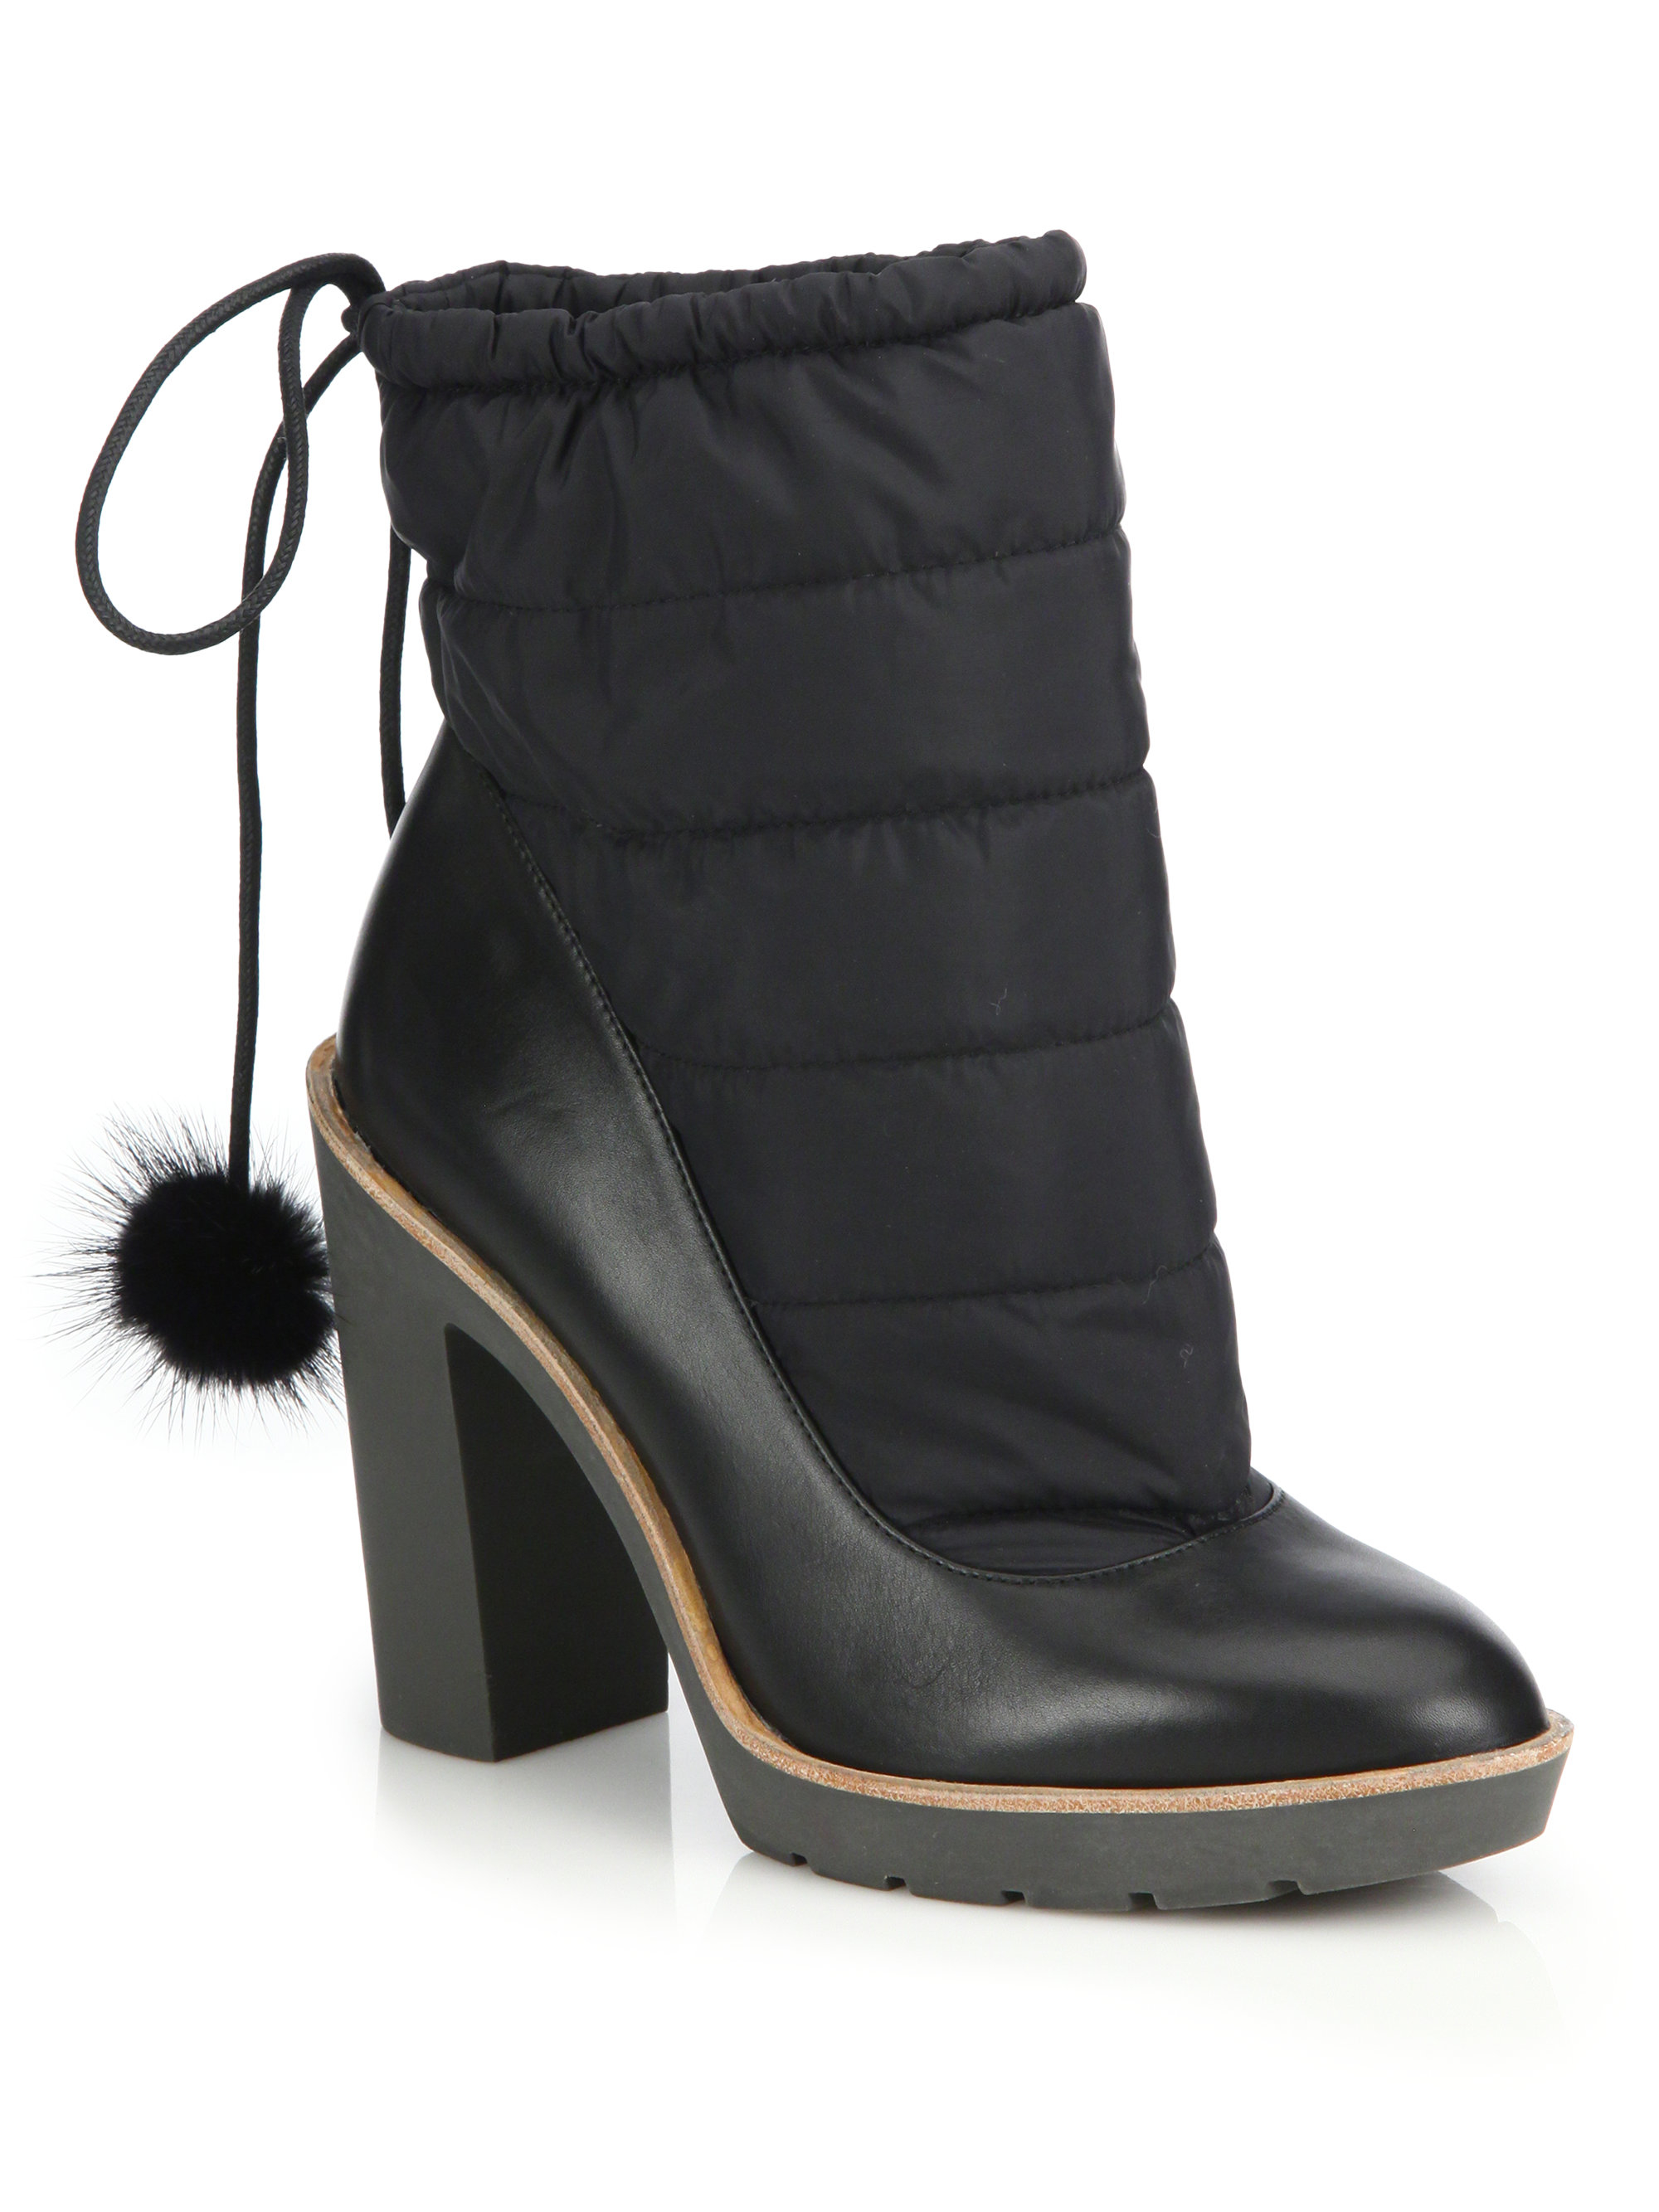 Kate spade new york Ginnie Faux Fur Pom-pom Quilted Ankle Boots in ...